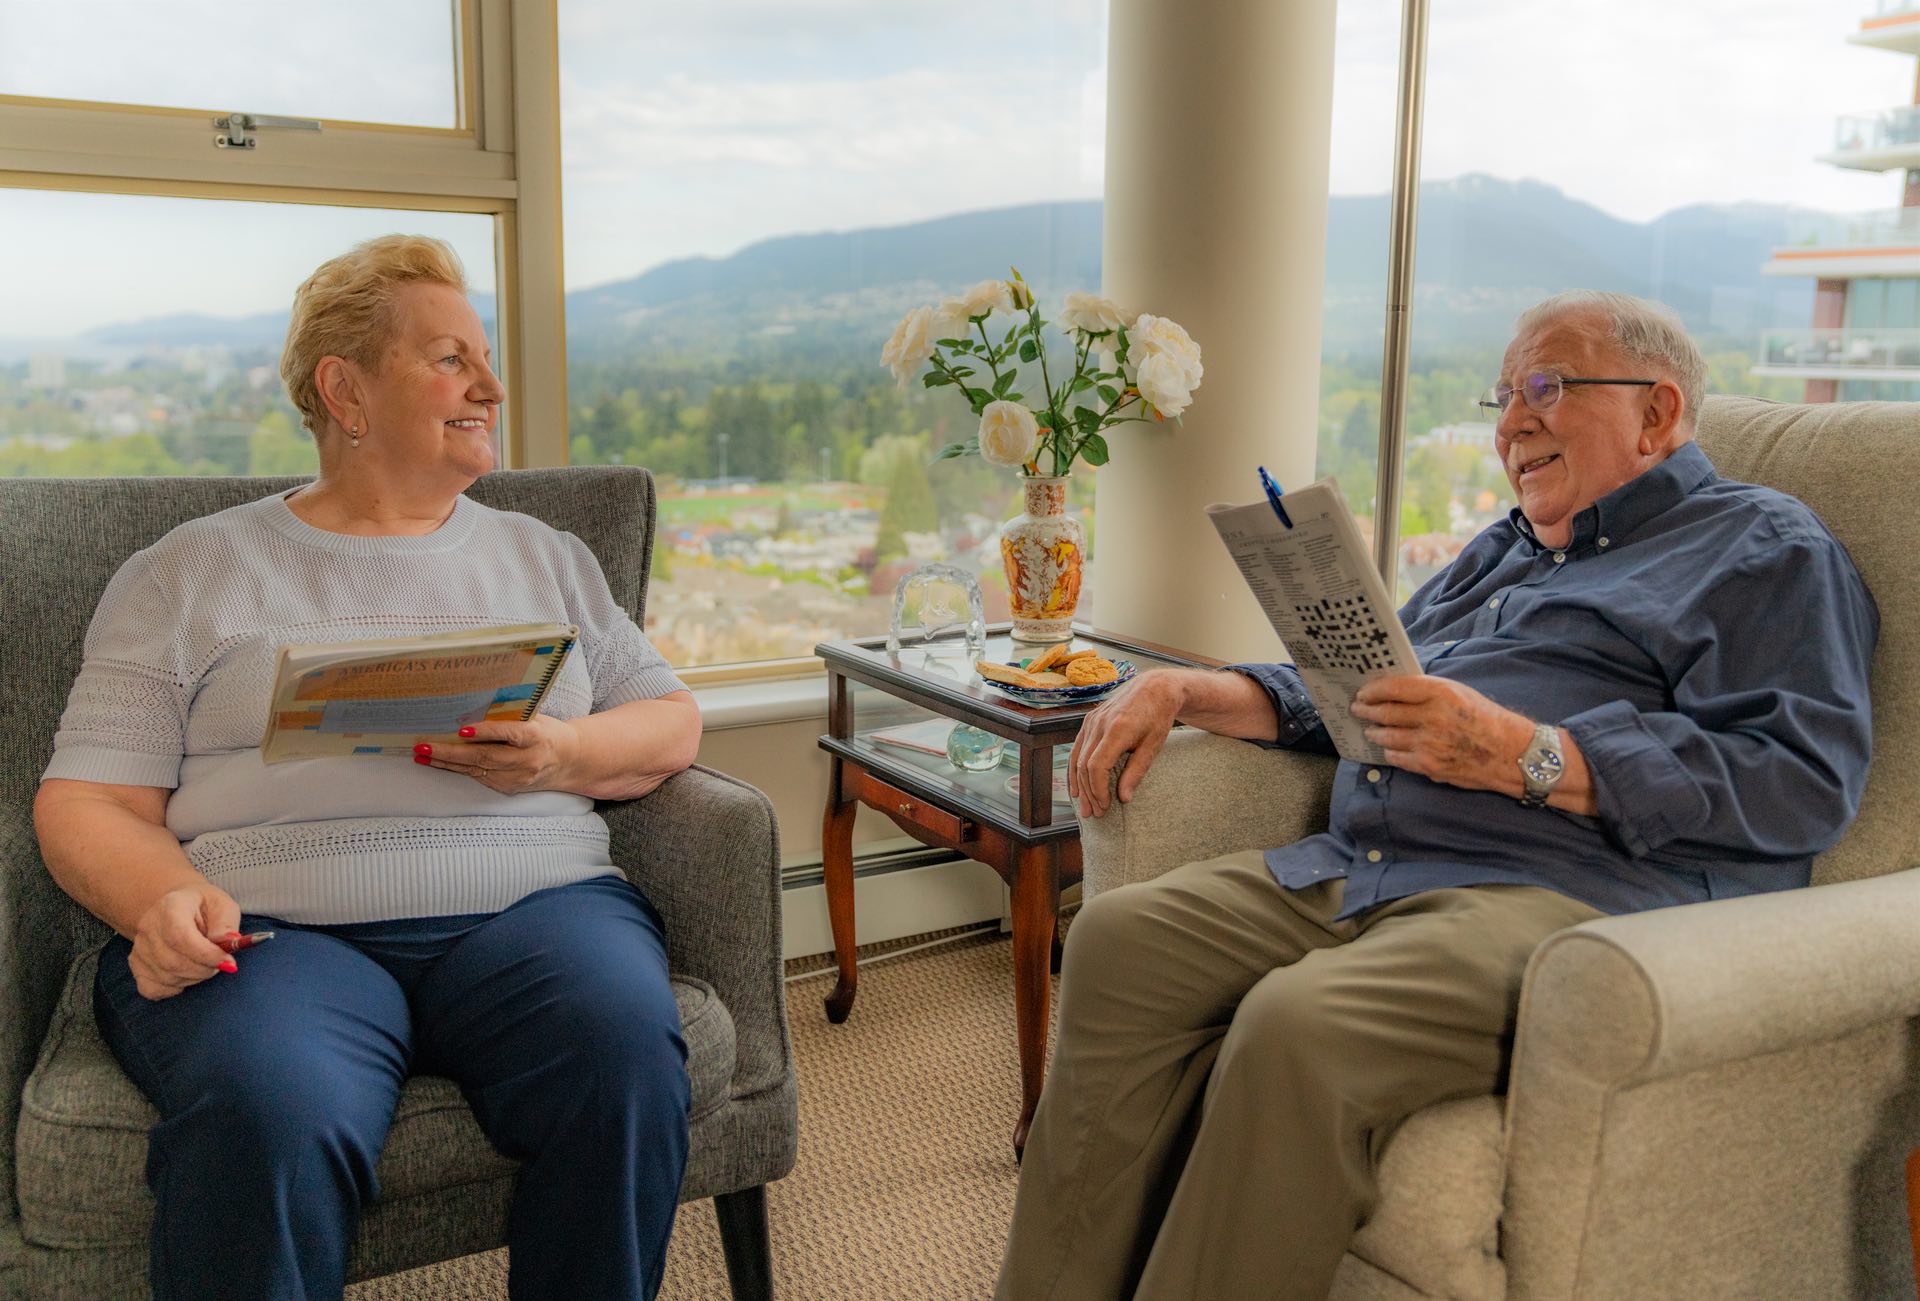 Summerhill PARC residents Marlene and Harry chatting in their suite